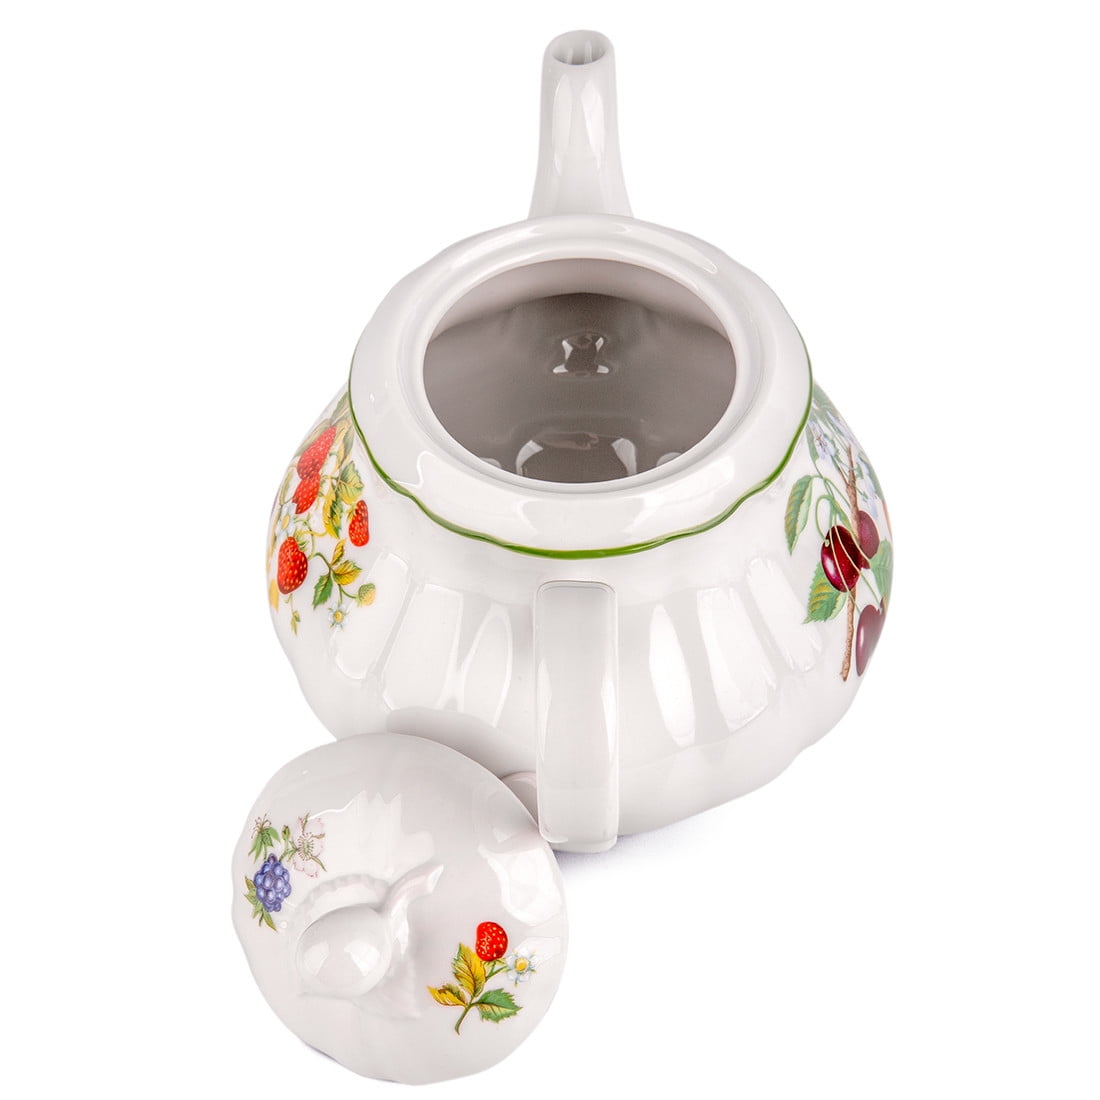 Kitchen Coffee pot with Lid 40.58 fl oz (1200 ml) Strawberry Porcelain  Coffee Pot Brewer for Coffee Serving Pot